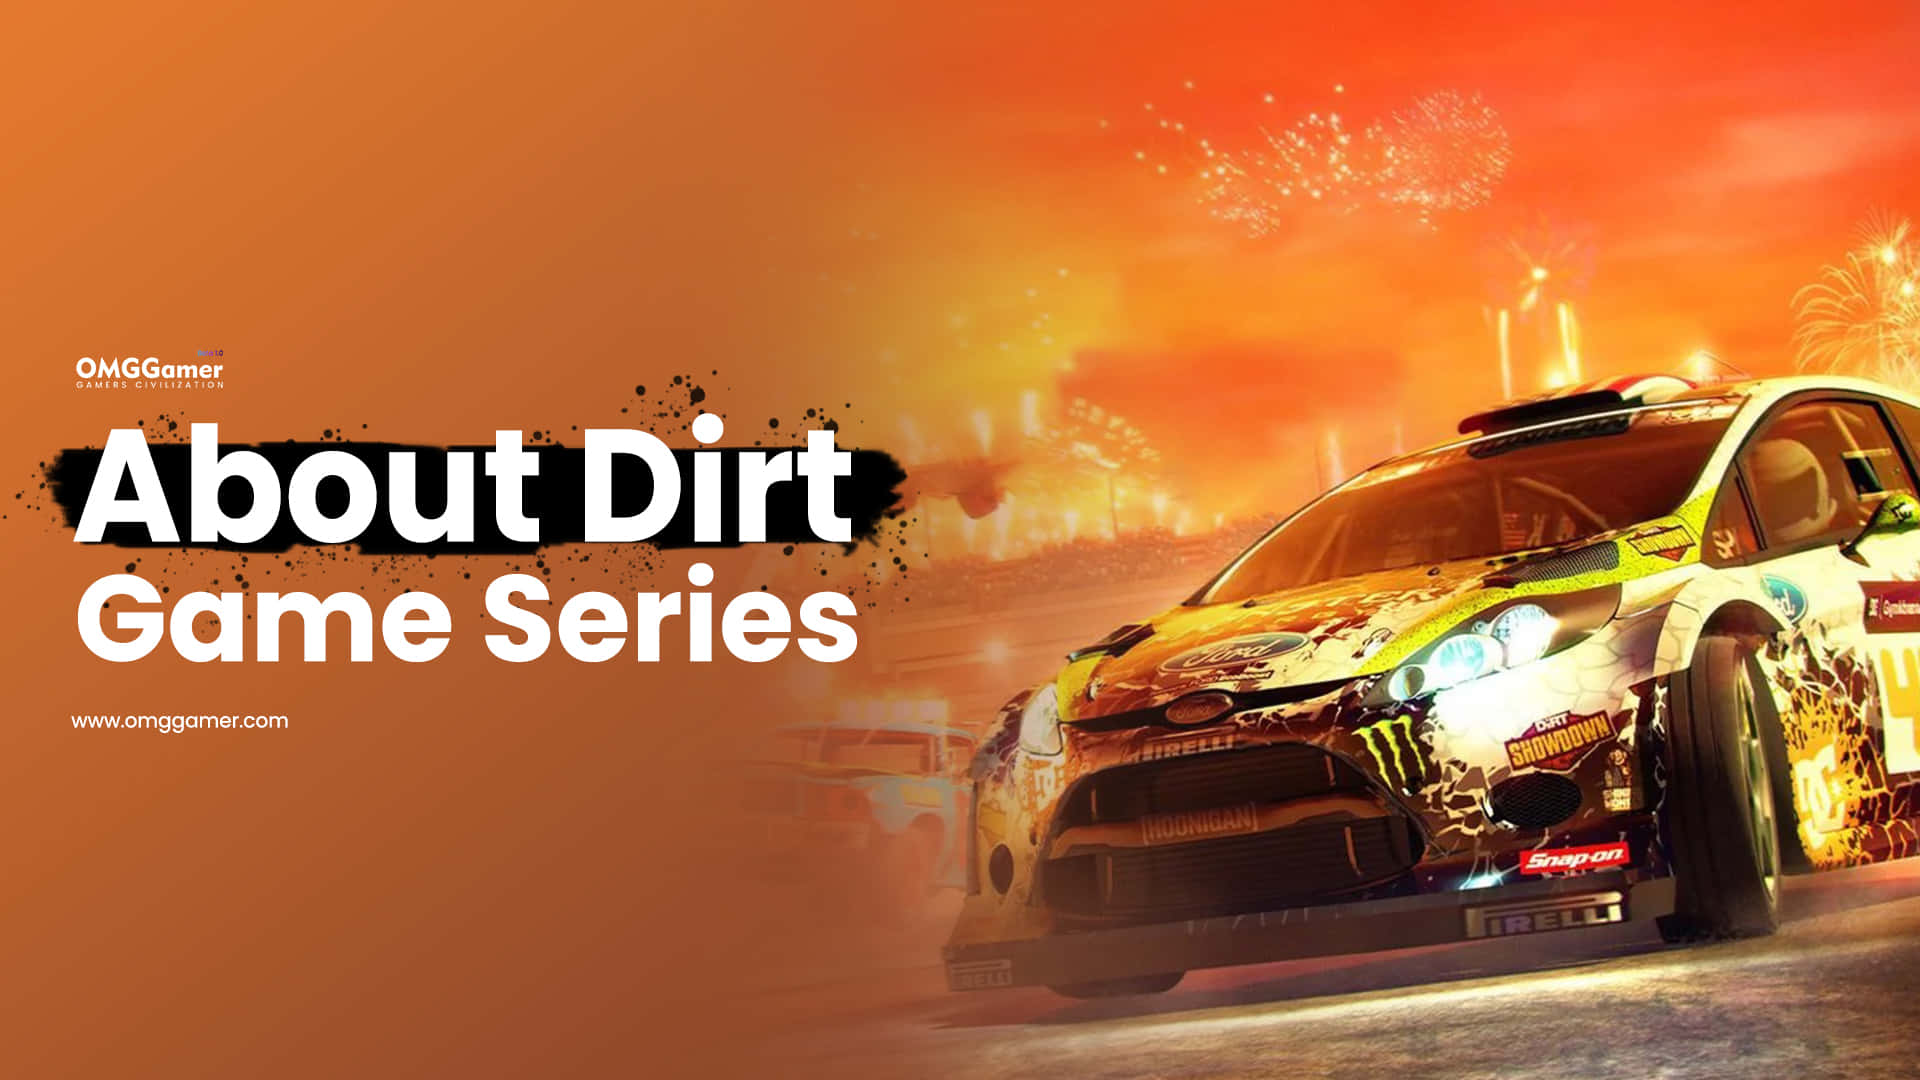 About Dirt Game Series